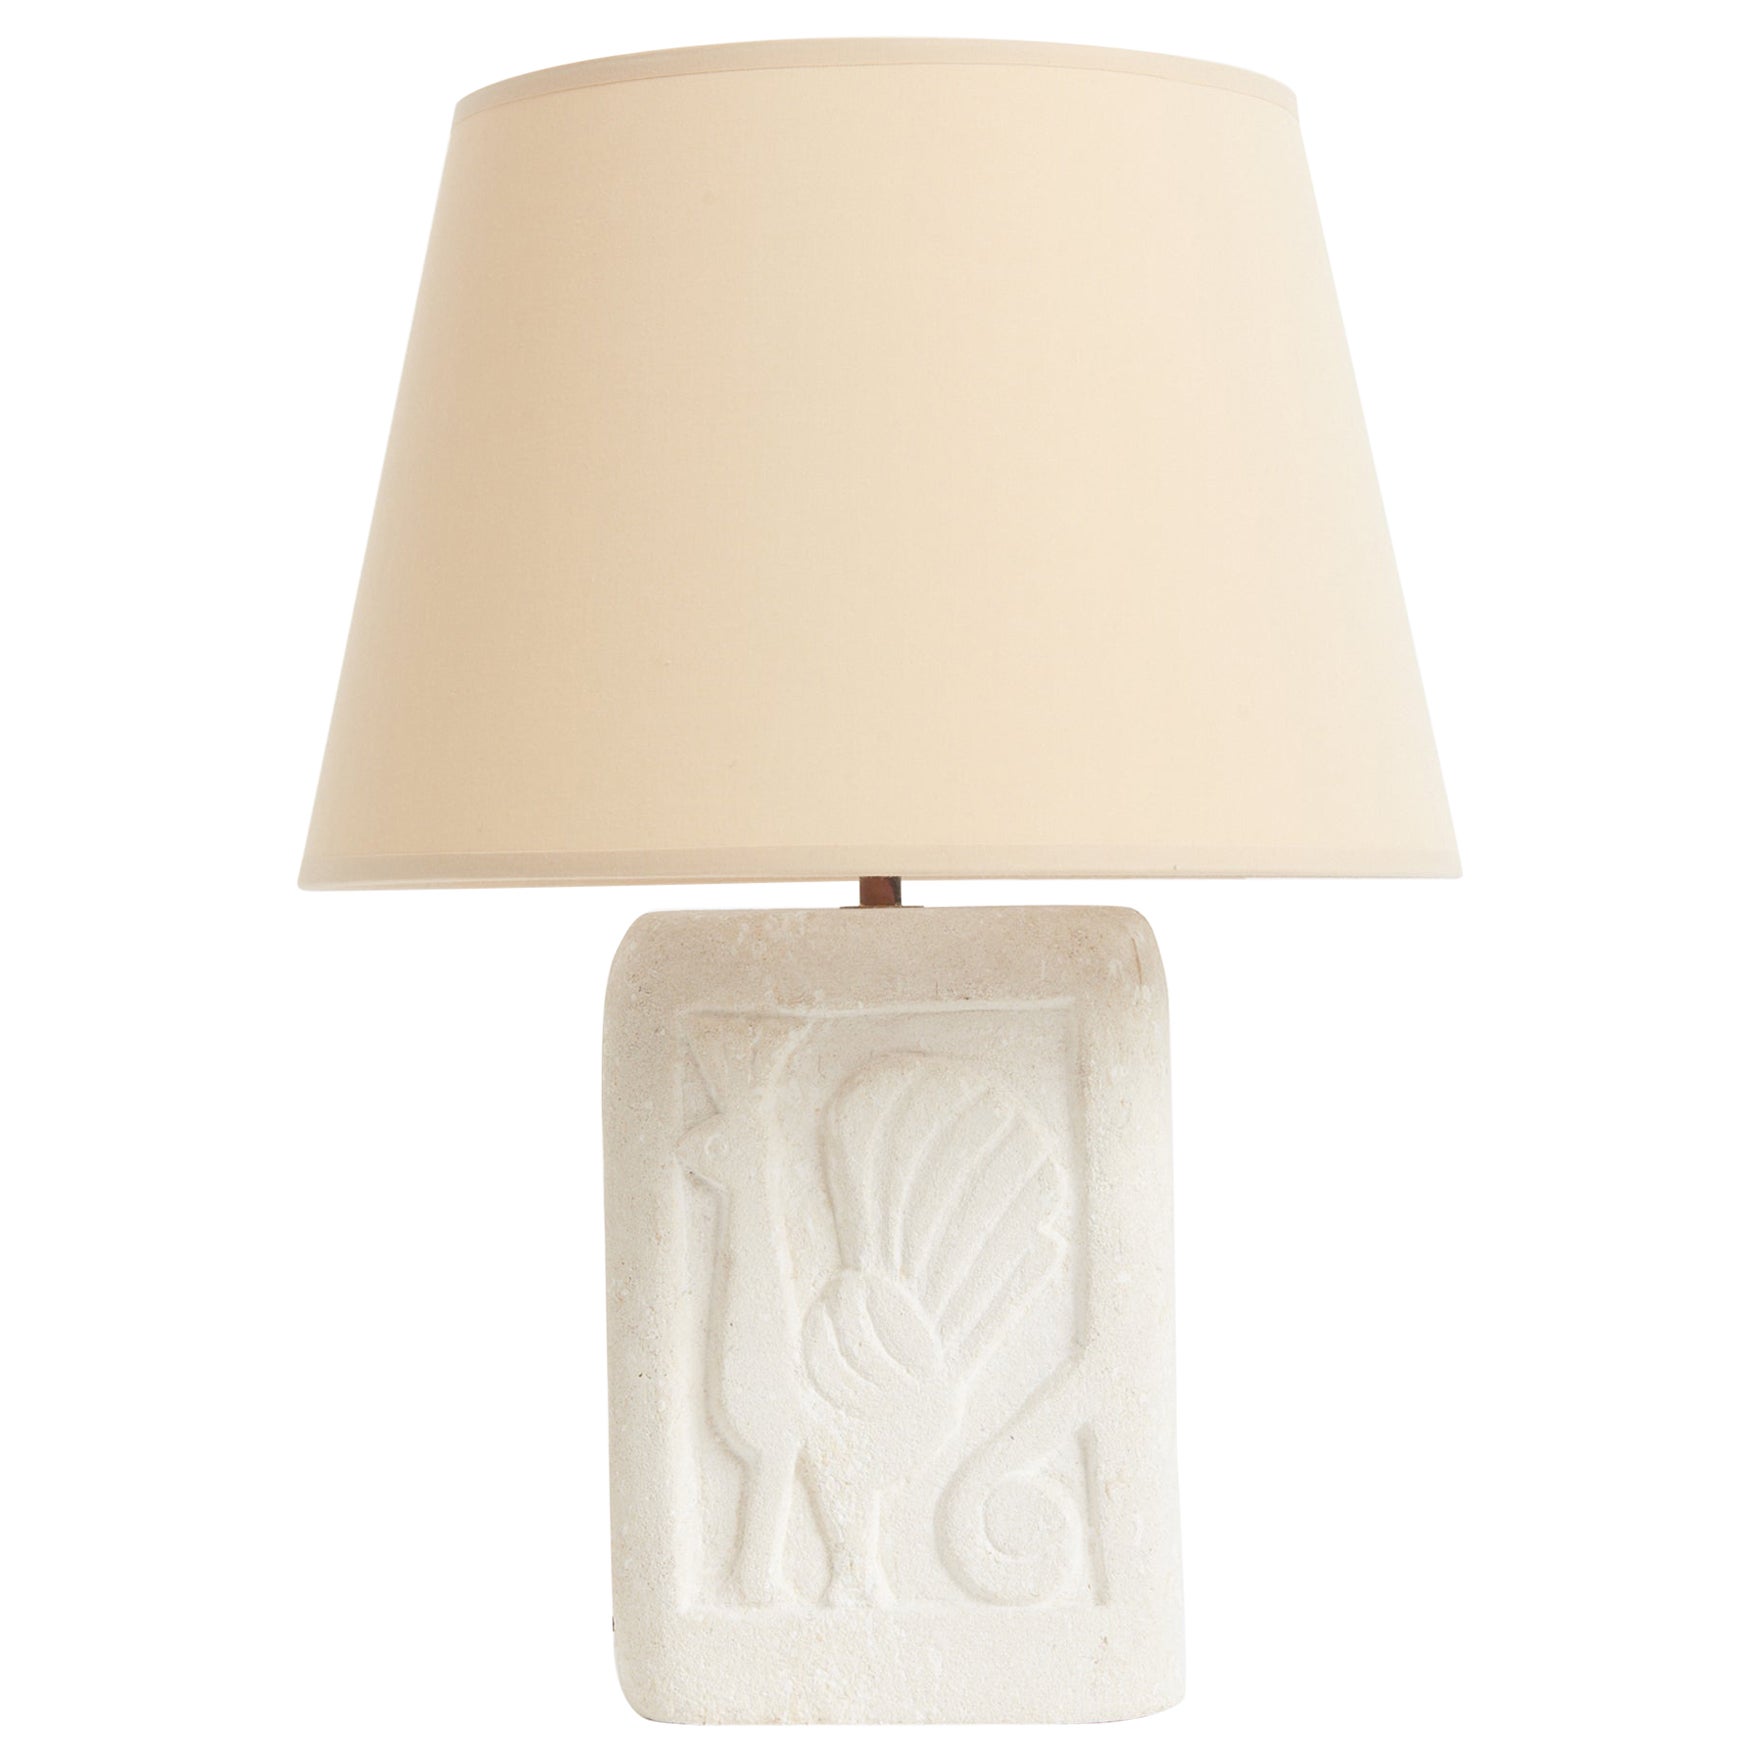 1960s Carved Stone Table Lamp